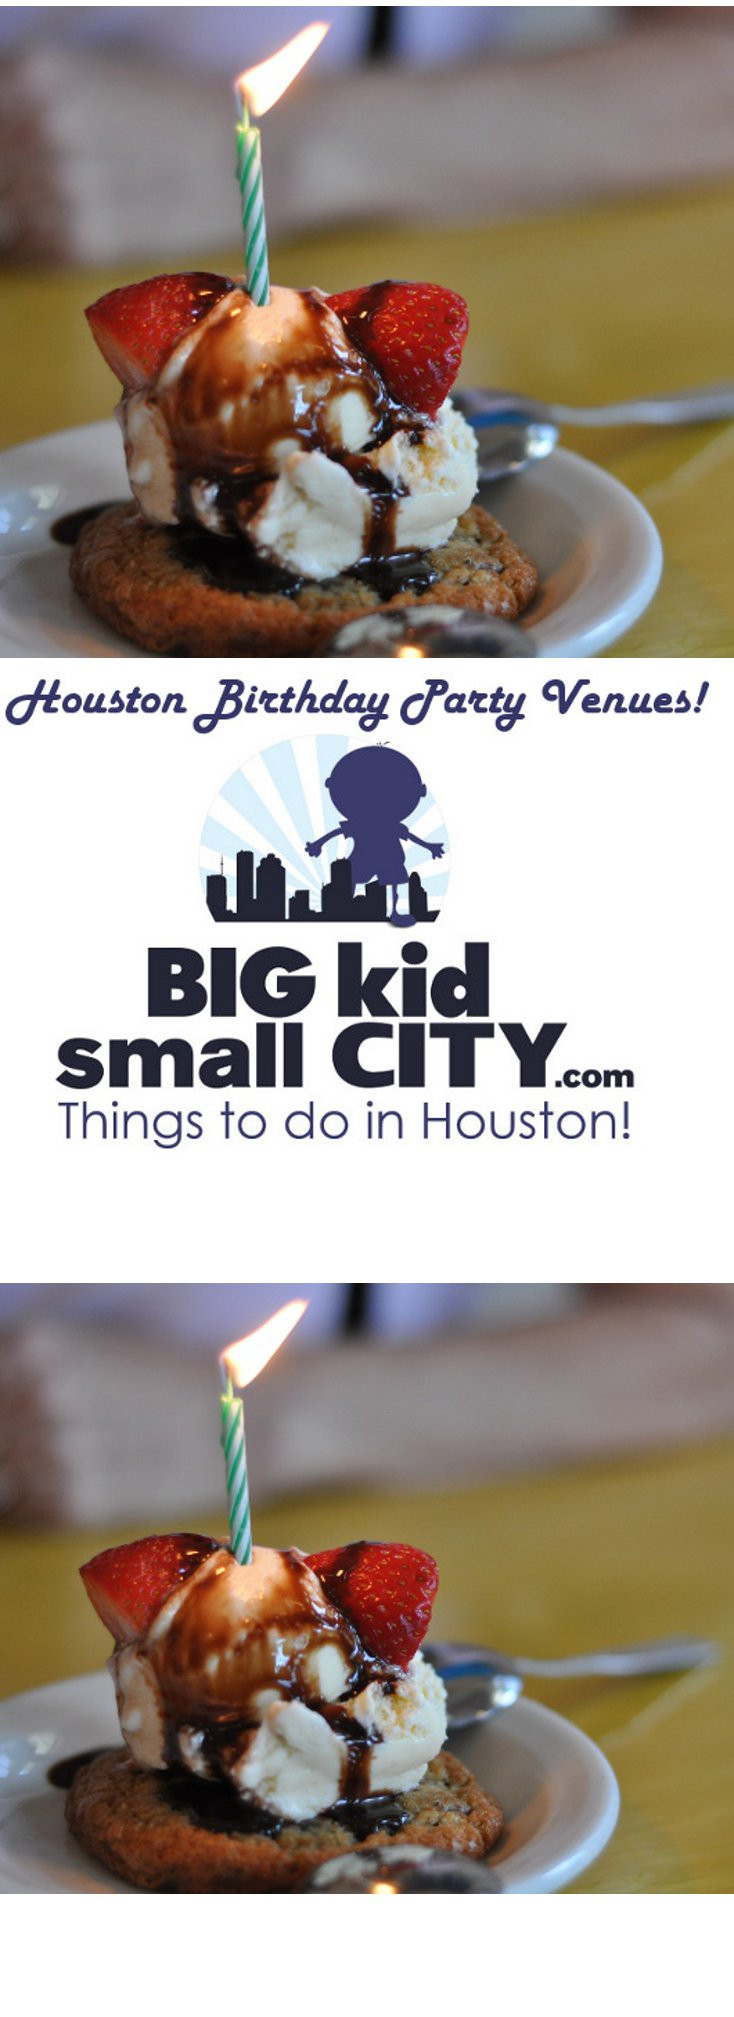 Birthday Party Places Houston
 Birthday Party Venues in Houston… Where to Have Your Next